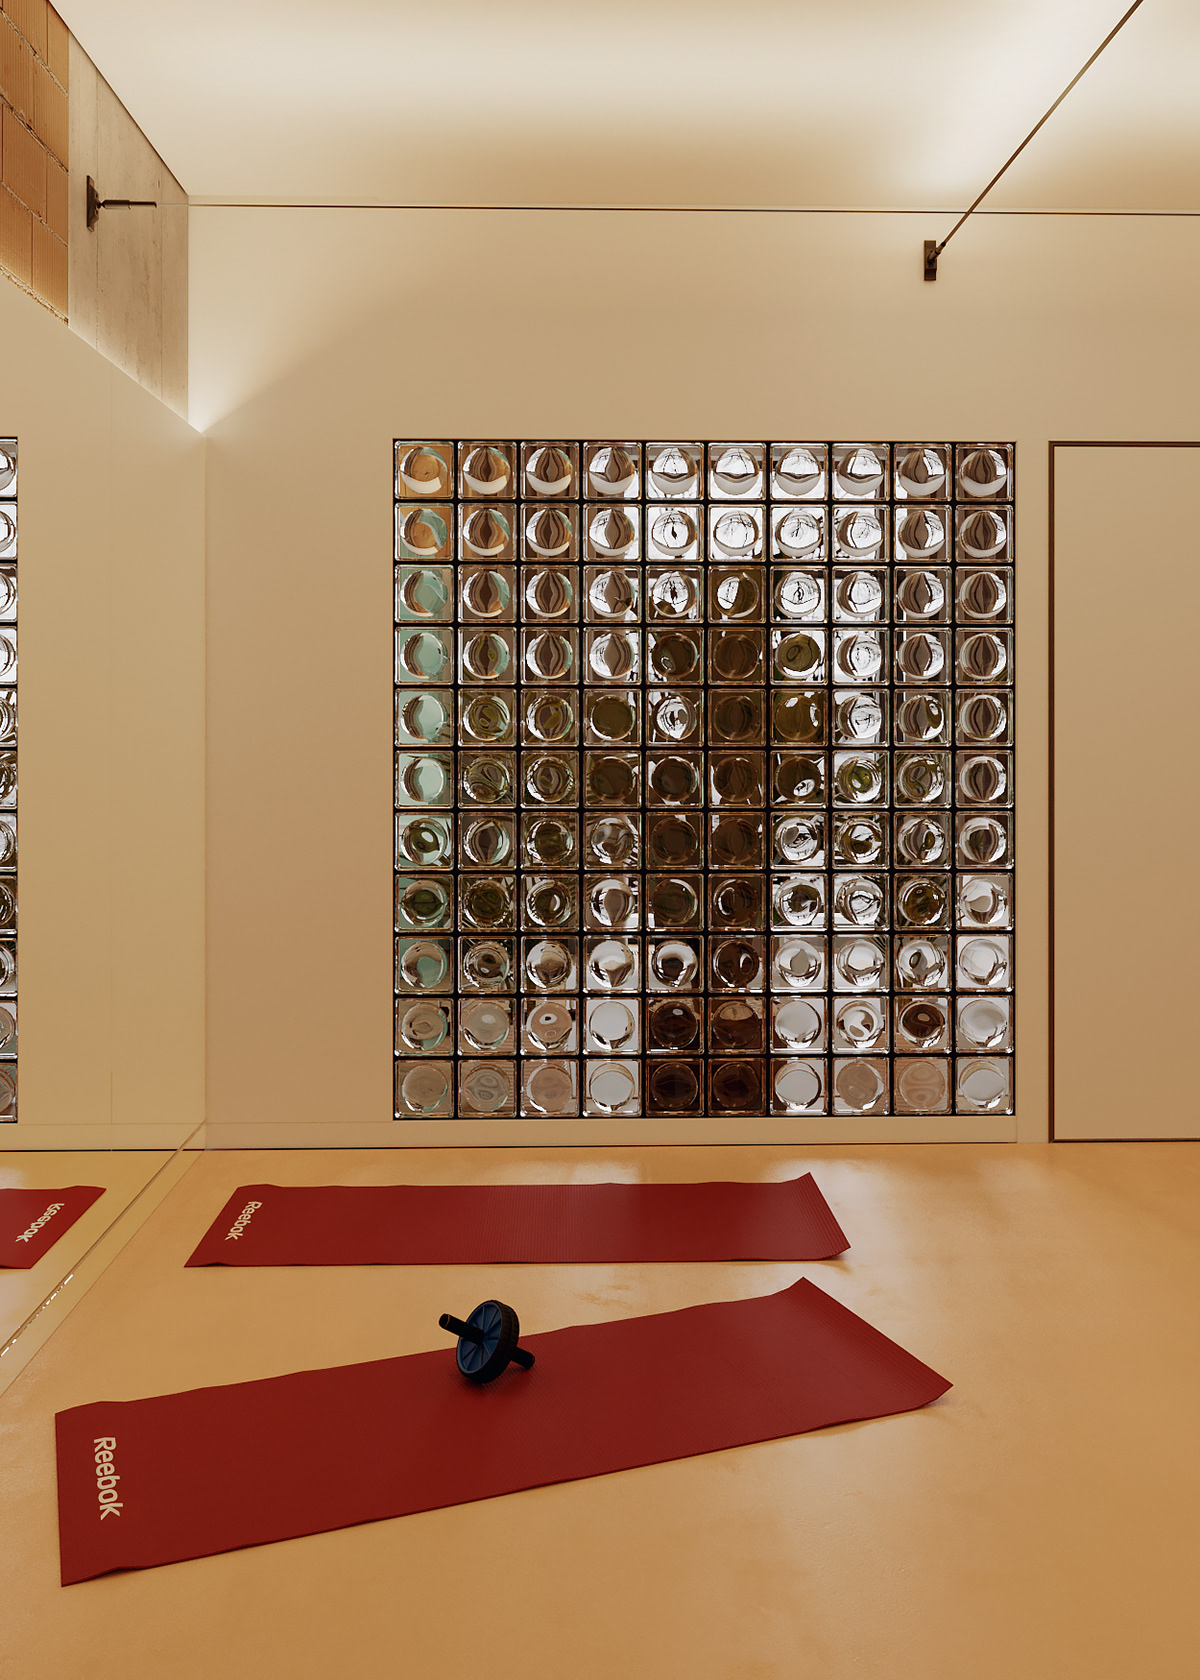 Red yoga mats contrast with the beige floor and walls. Every detail in this zone is highlighted by the lighting system.